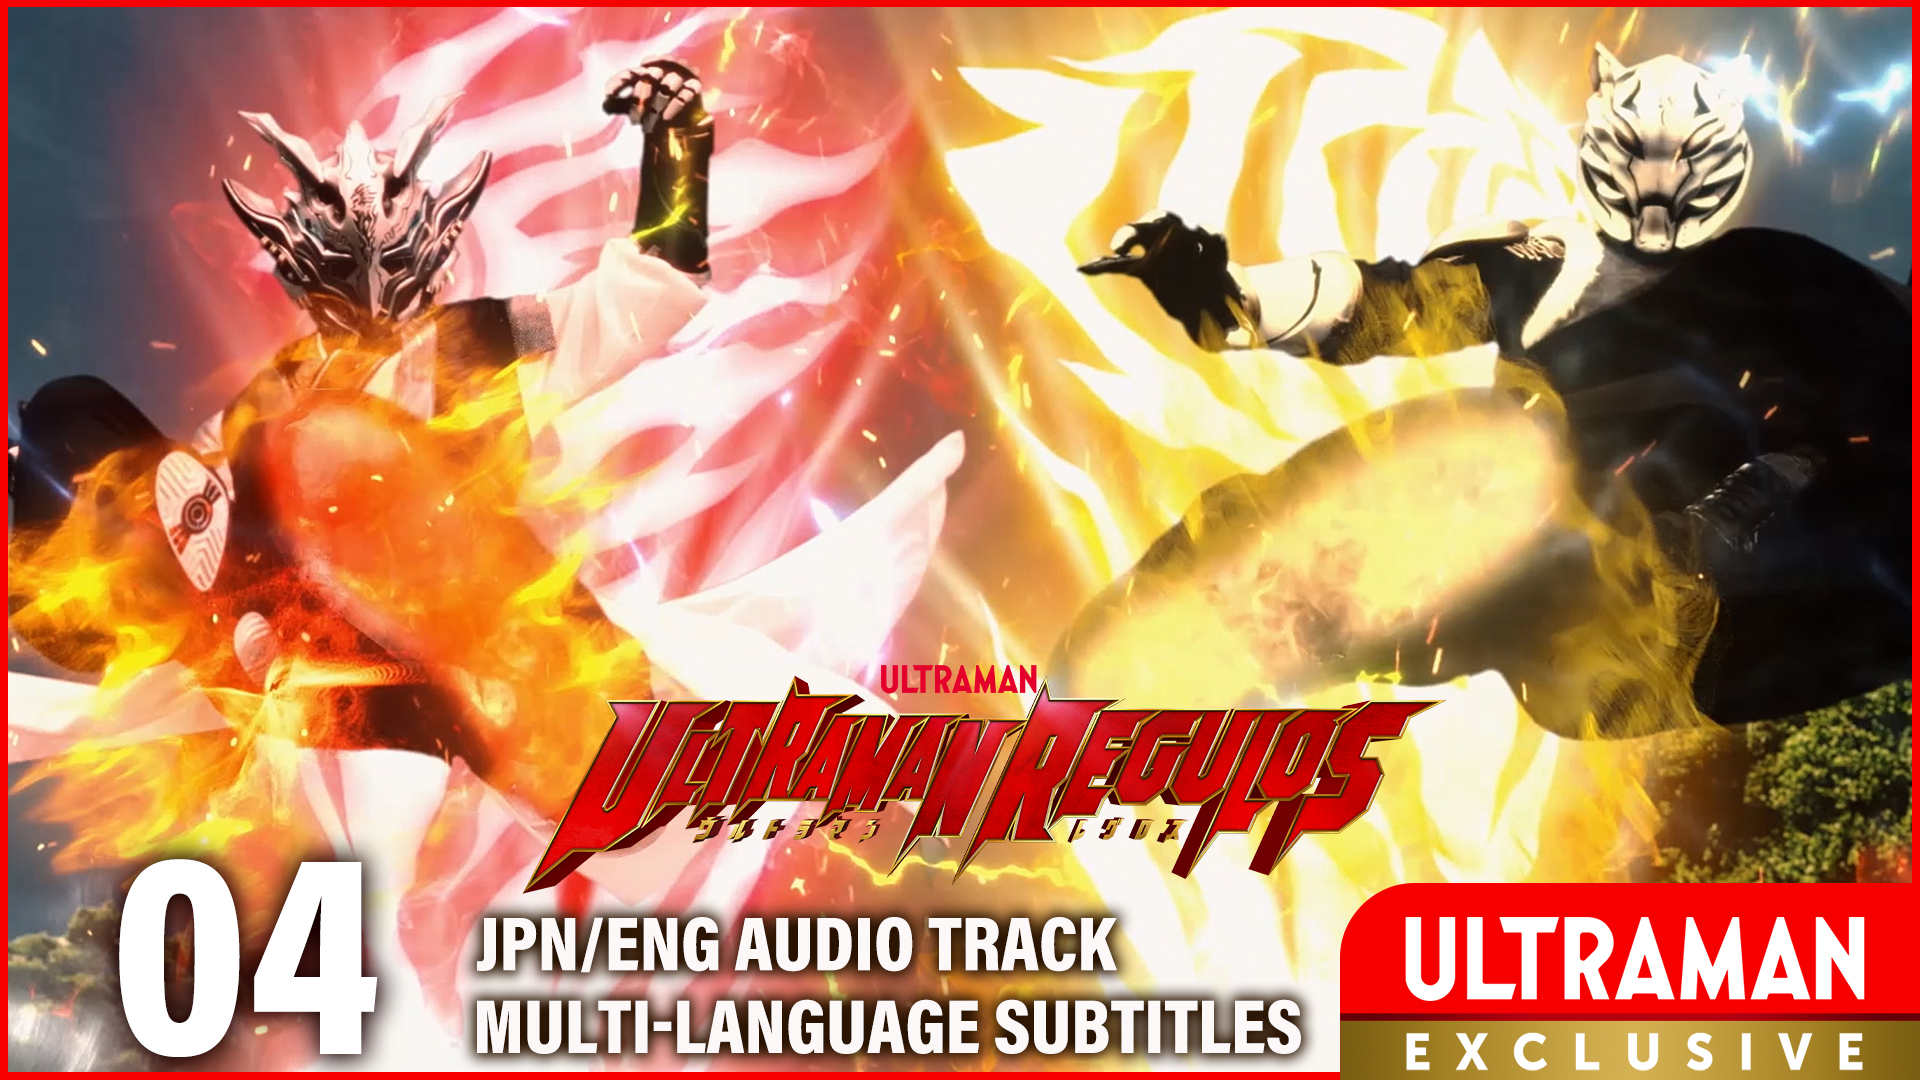 Ultraman Regulos Episode 4 Available on Ultraman OFFICIAL YouT...